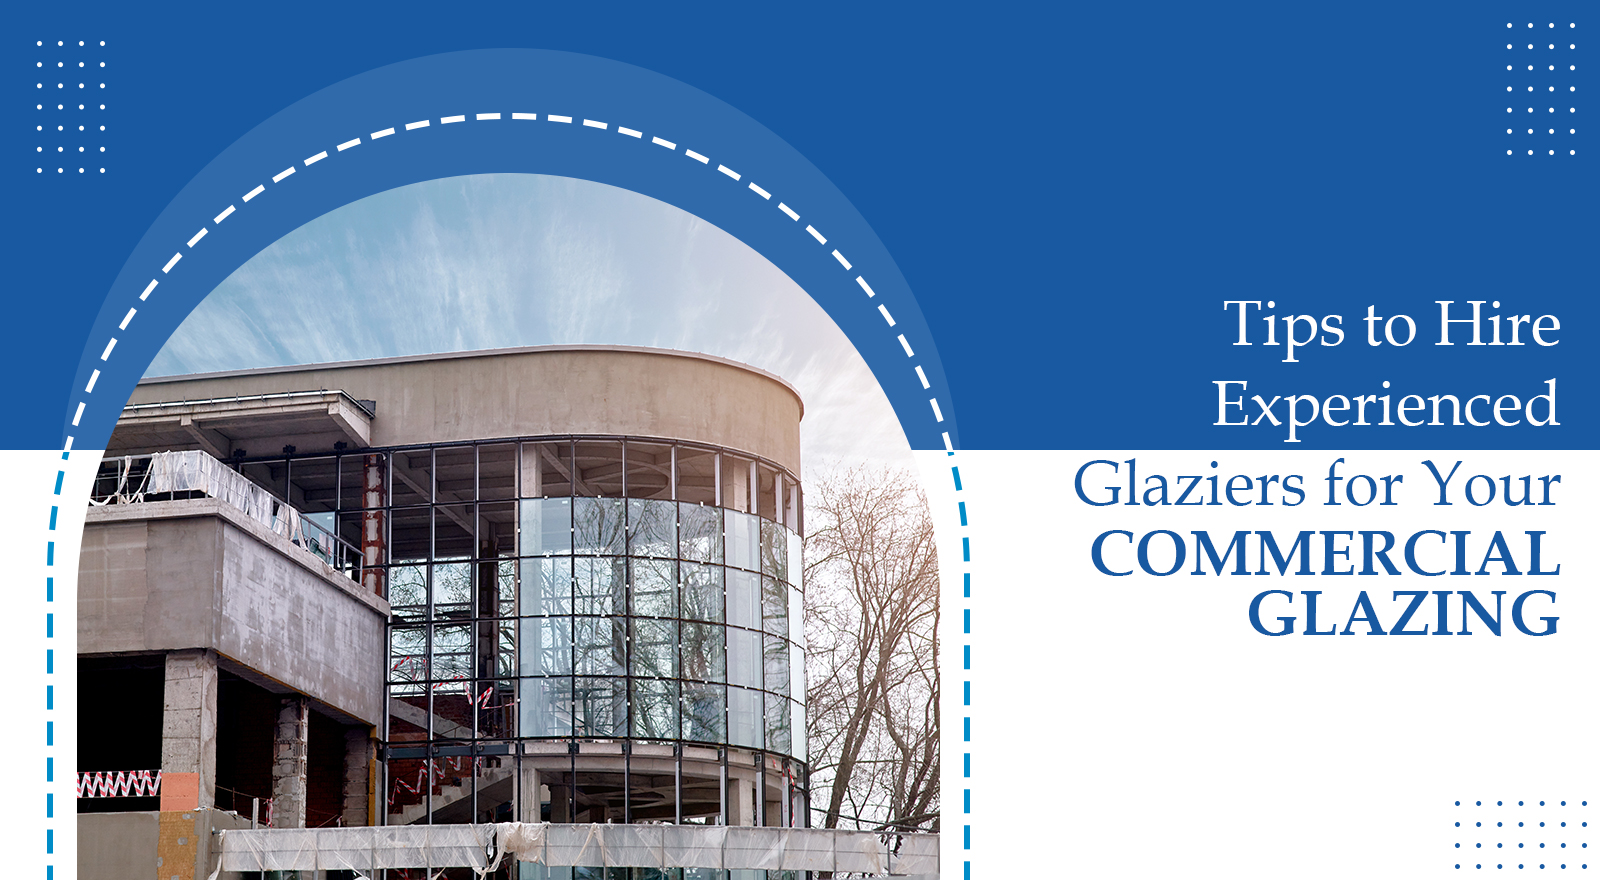 Tips to Hire Experienced Glaziers for Commercial Glazing